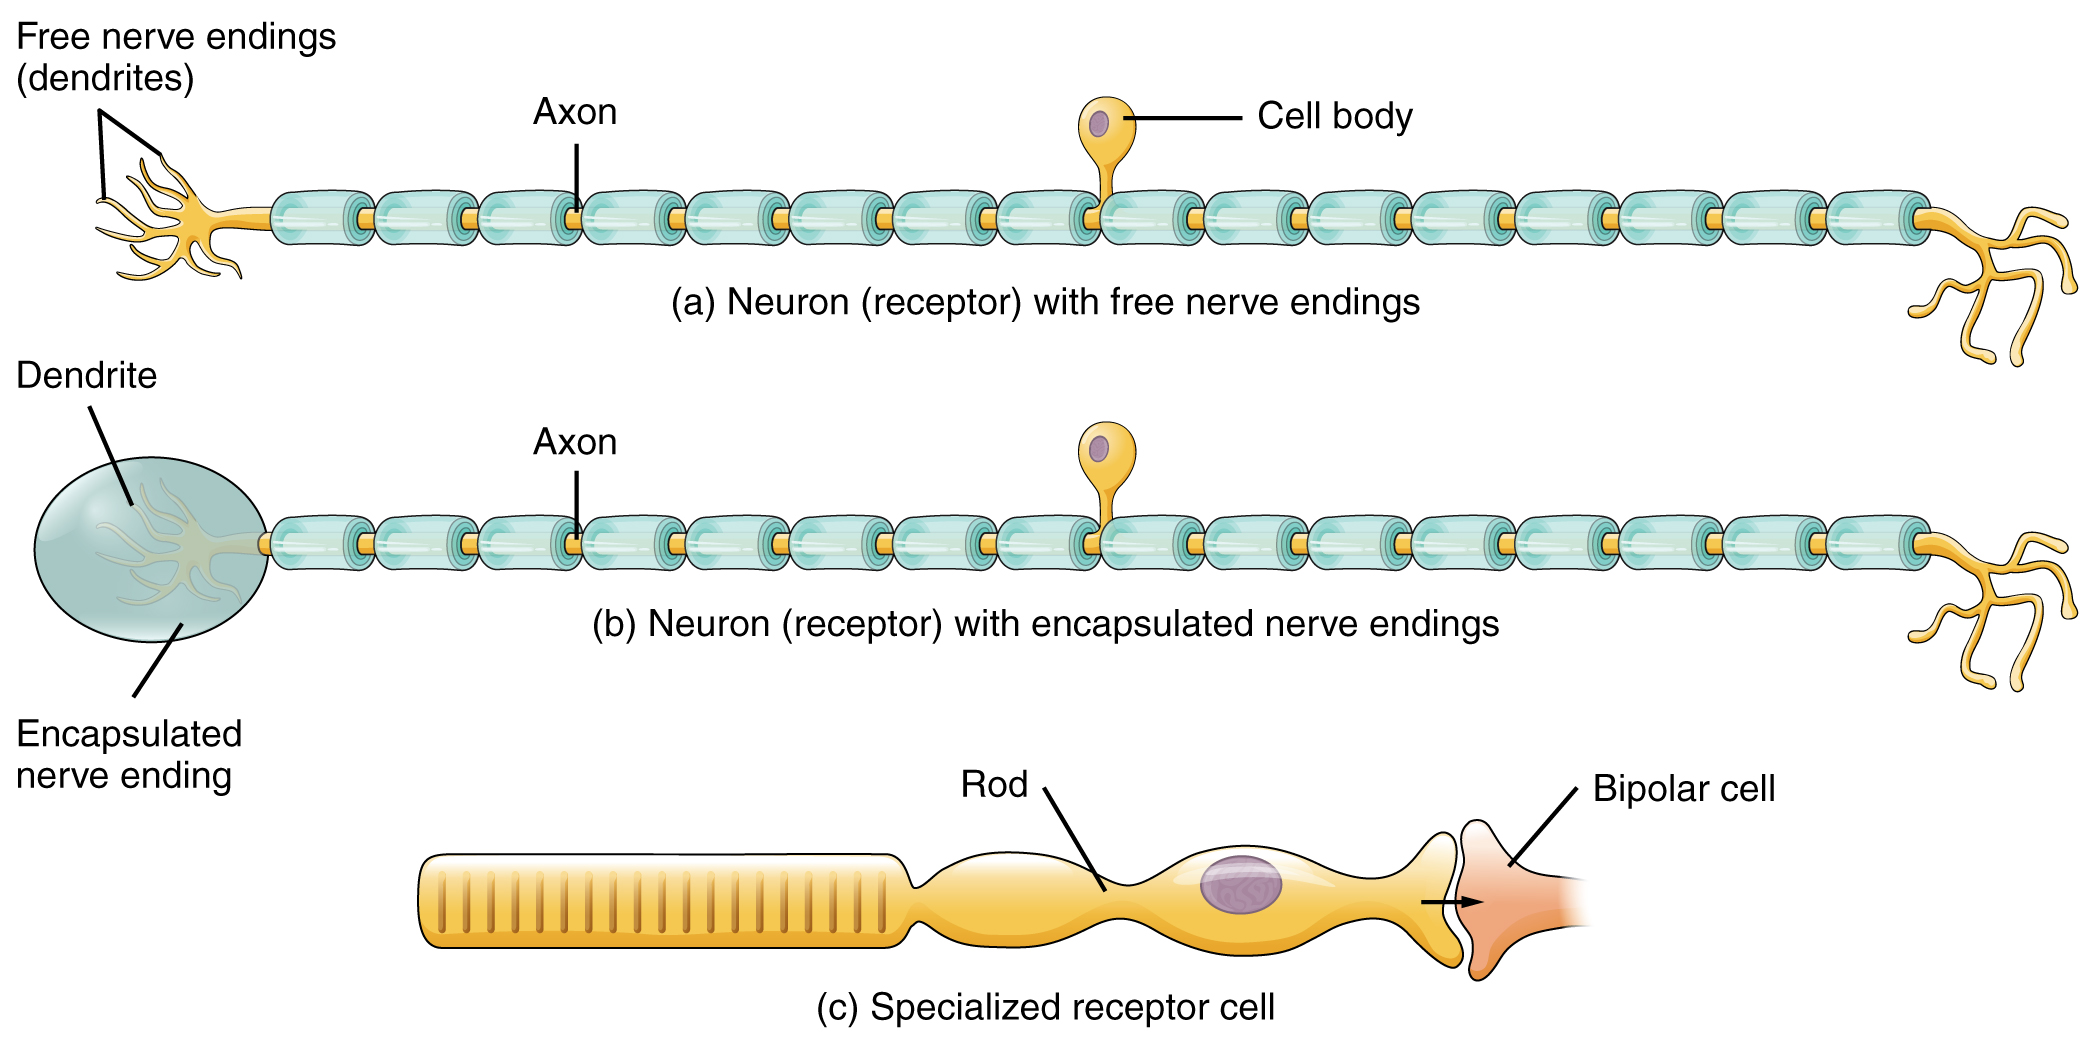 This figure shows the different types of receptors. The top panel shows a neuron receptor with free receptor endings, the middle panel shows a neuron receptor with encapsulated nerve endings, and the bottom panel shows a specialized receptor cell.